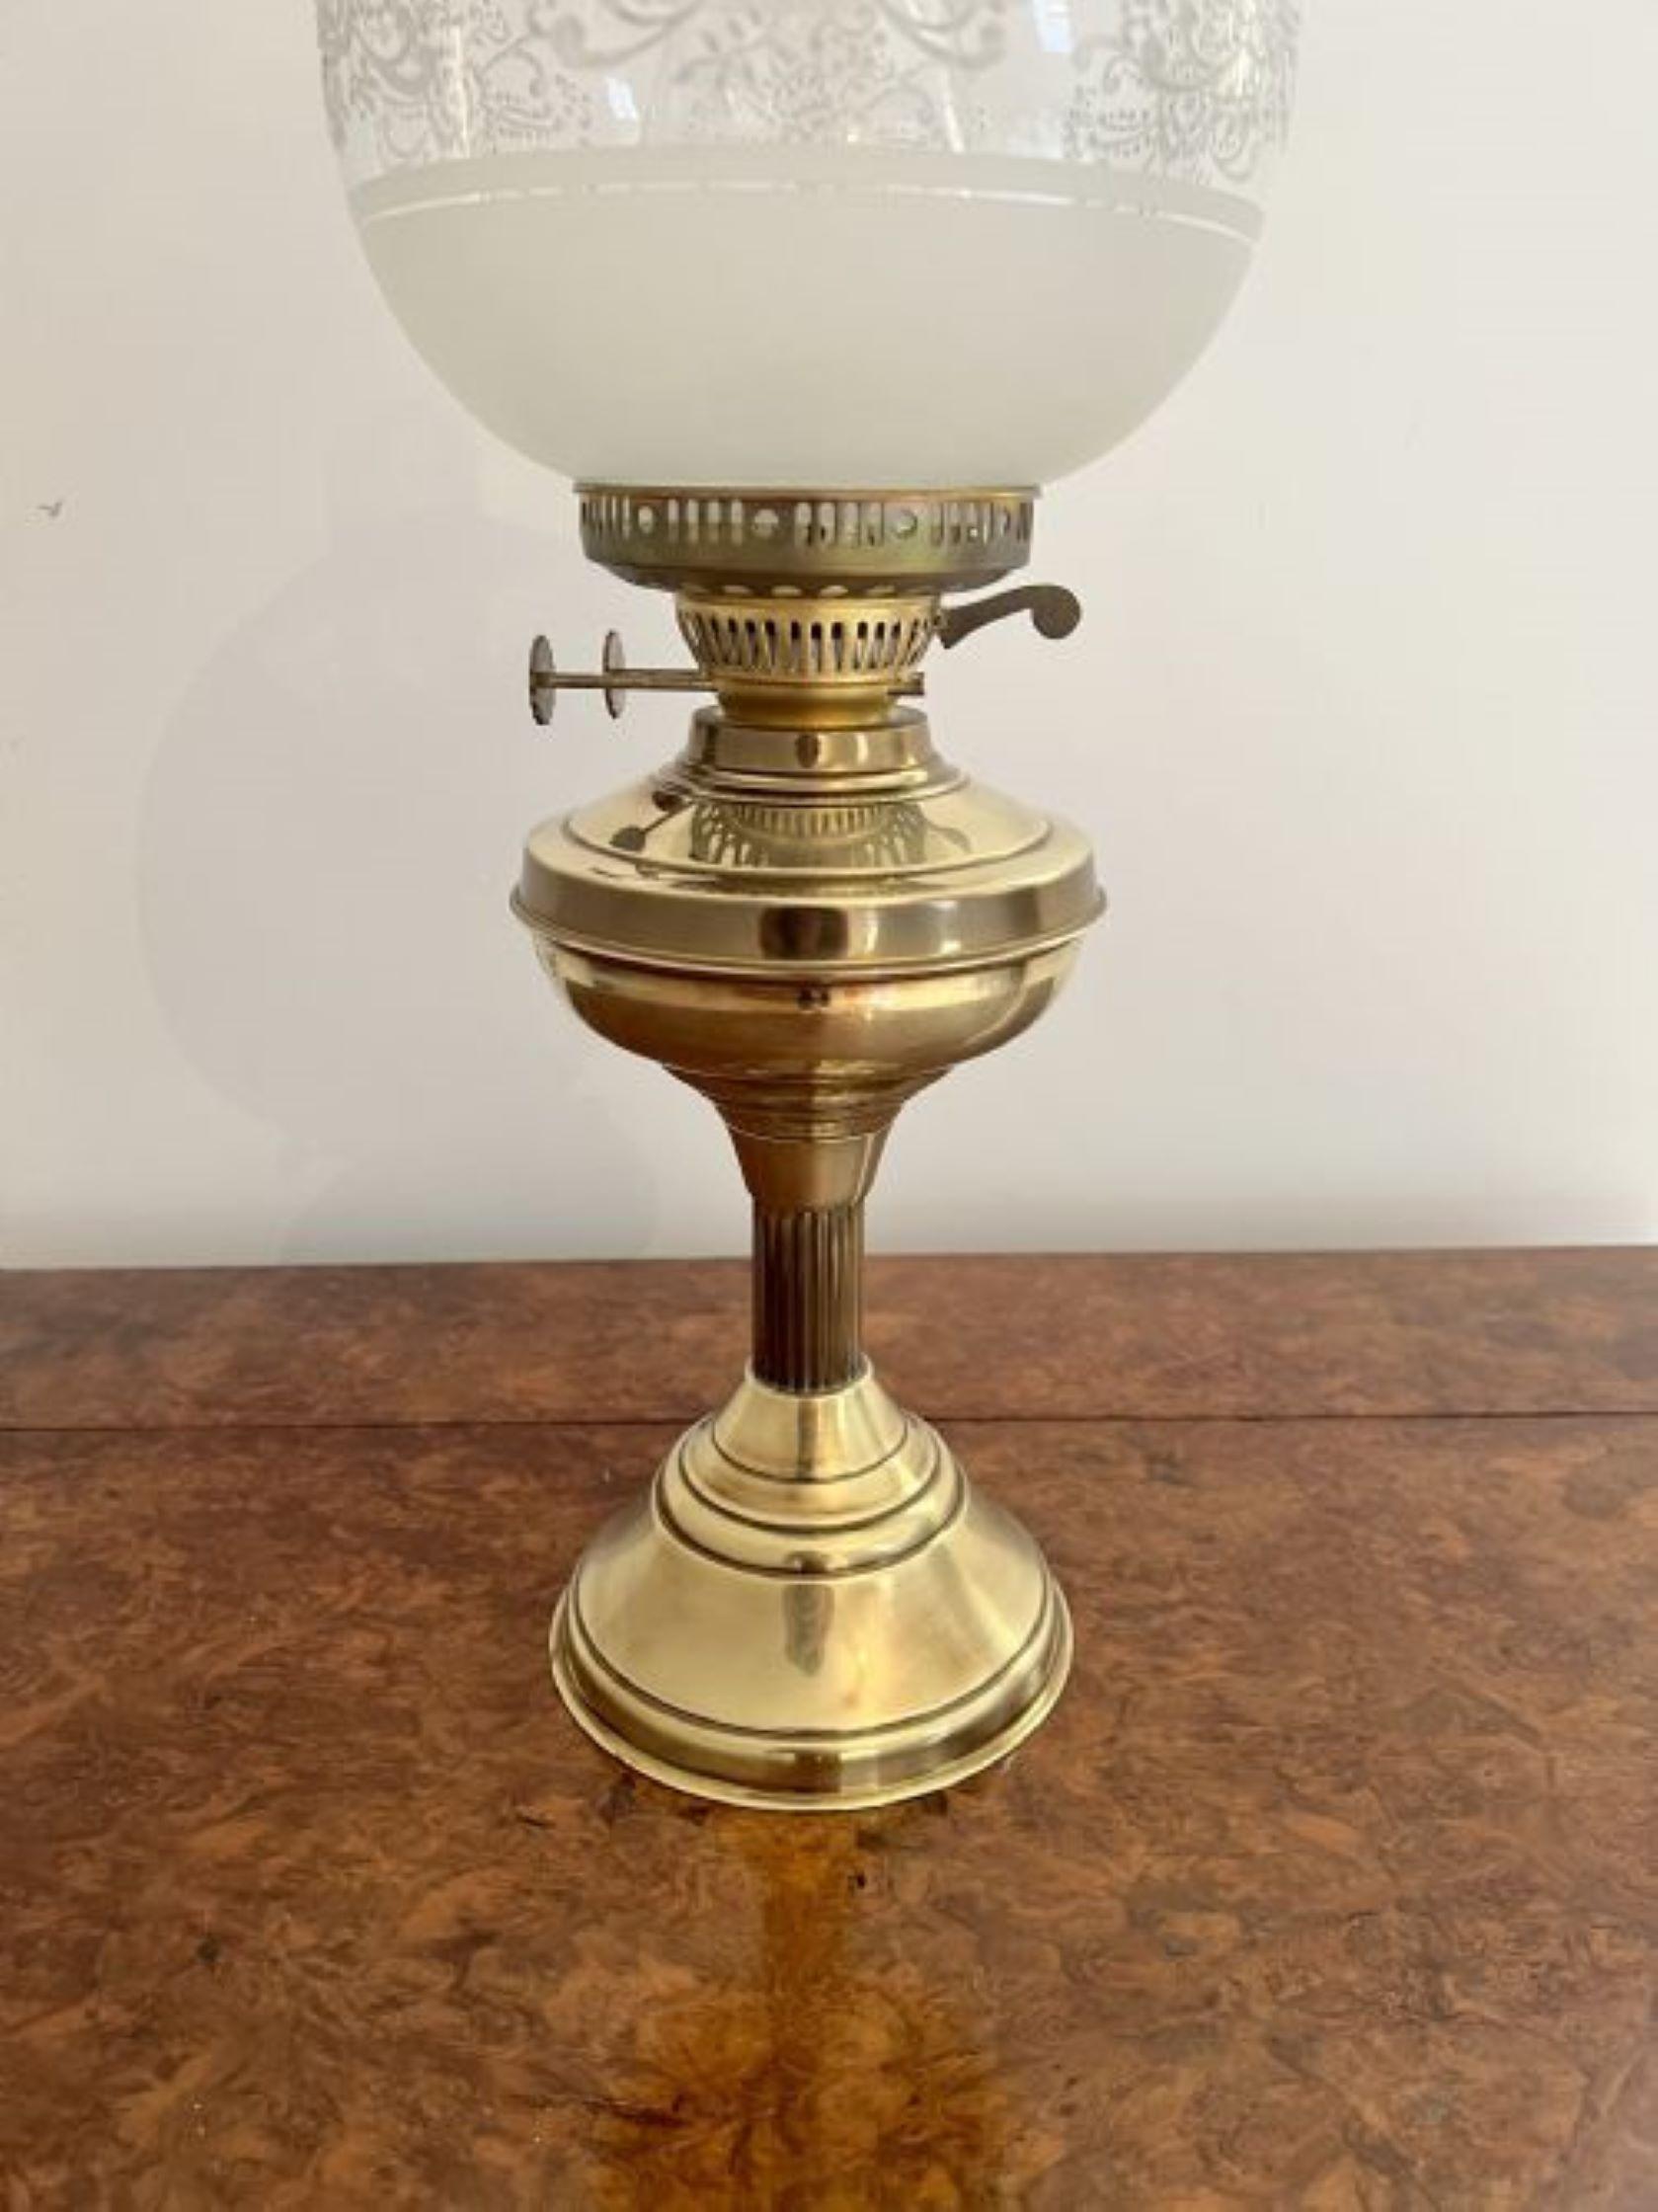 Antique Edwardian quality brass and glass oil lamp having the original white coloured patterned glass shade above a brass front on a turned shaped pedestal base